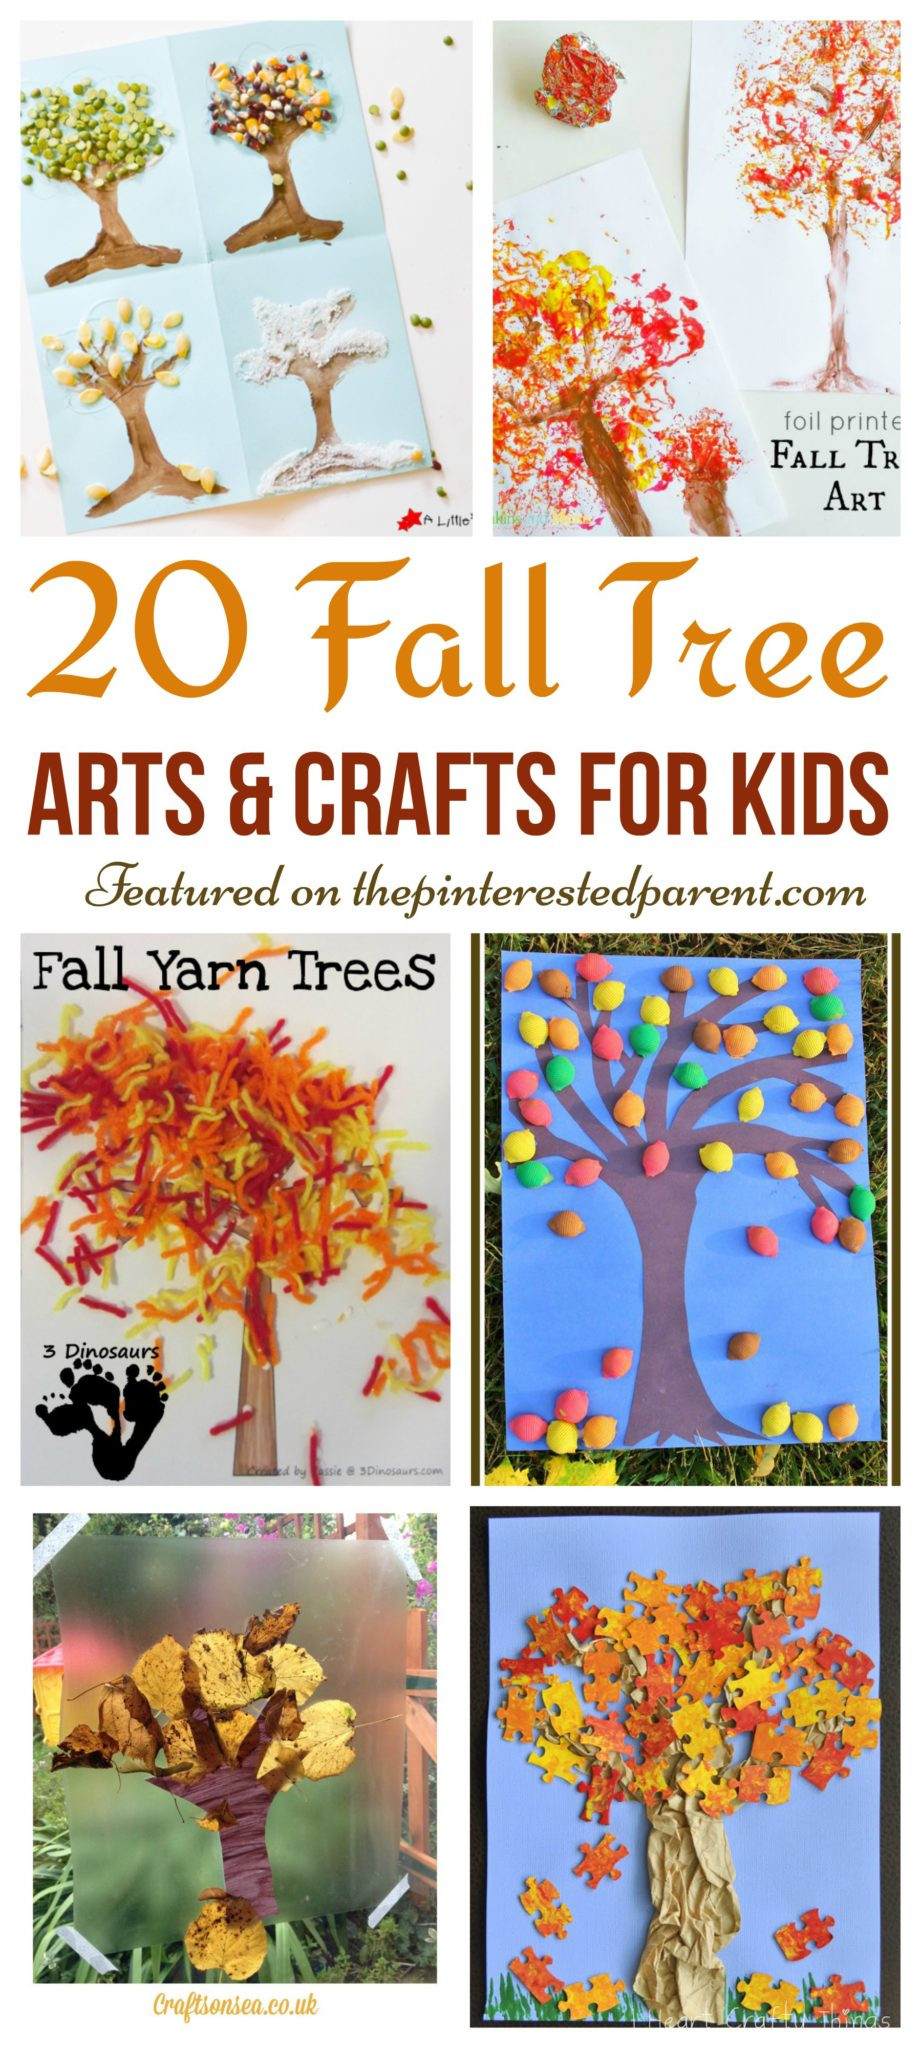 Craft Ideas For Preschoolers
 20 Fall Tree Arts & Crafts Ideas For Kids – The